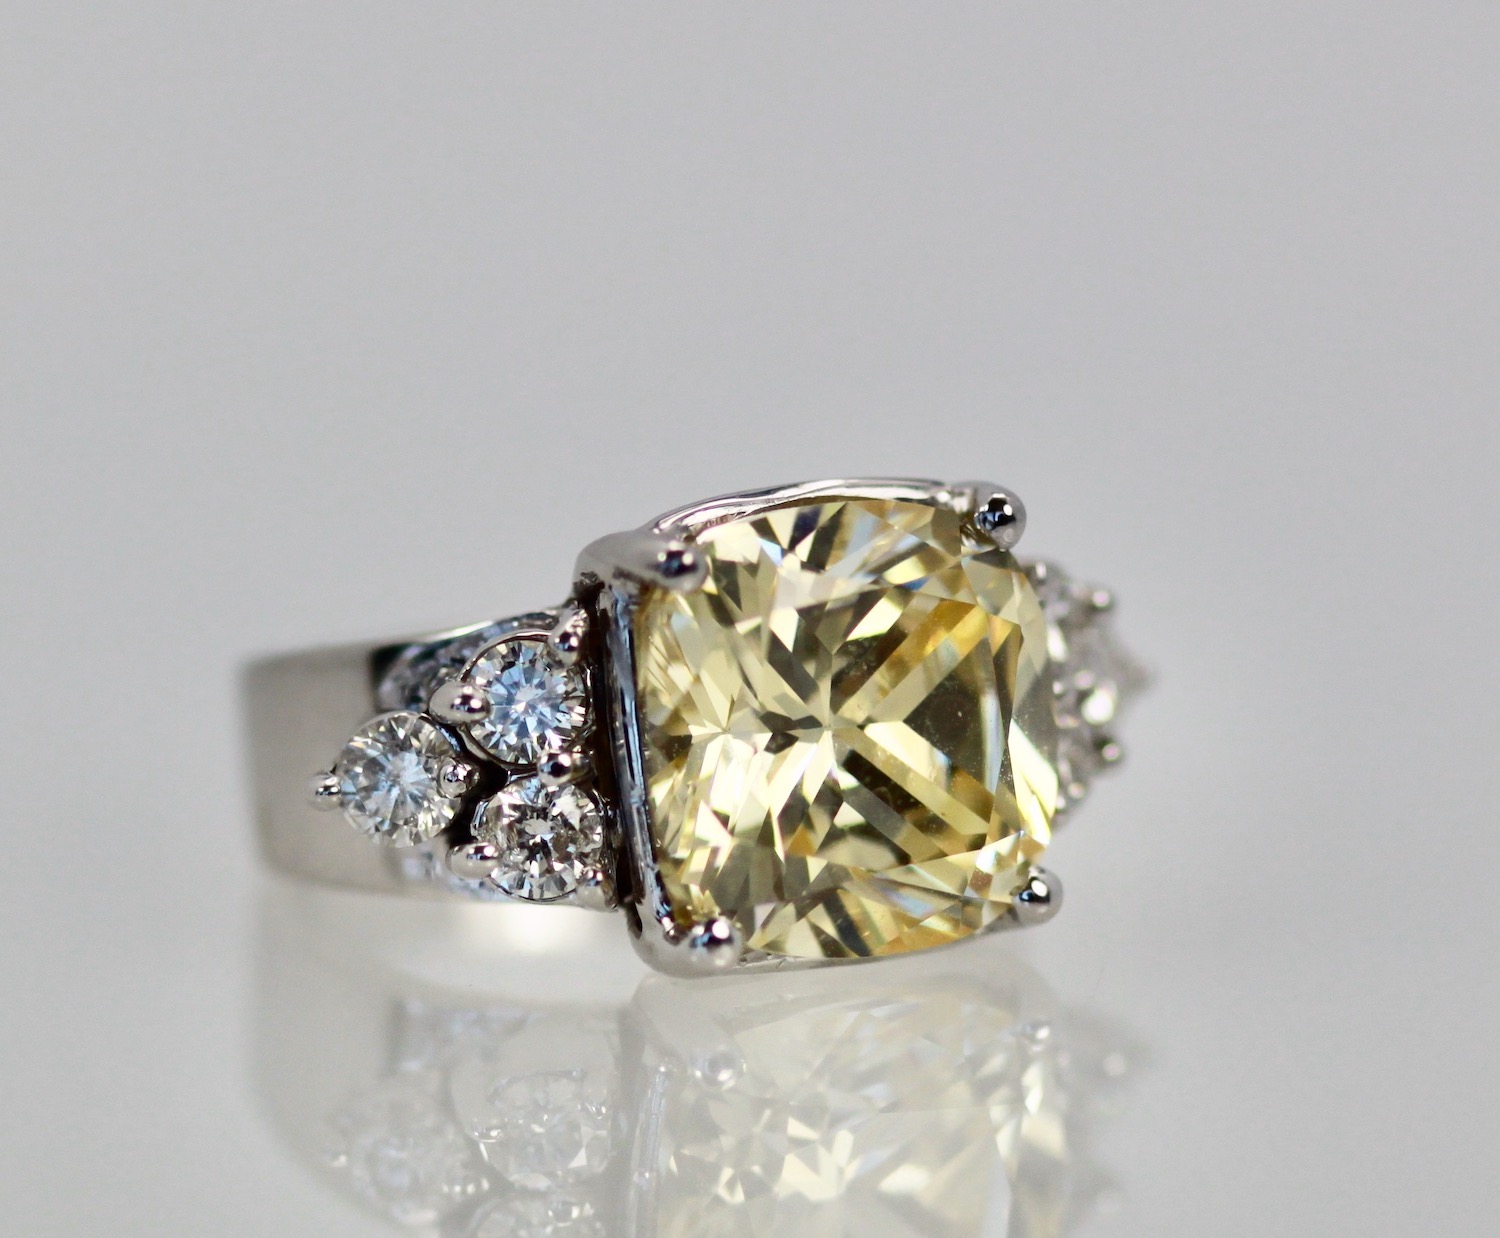 Large Yellow Sapphire Ring with Diamond Side Accents – detail